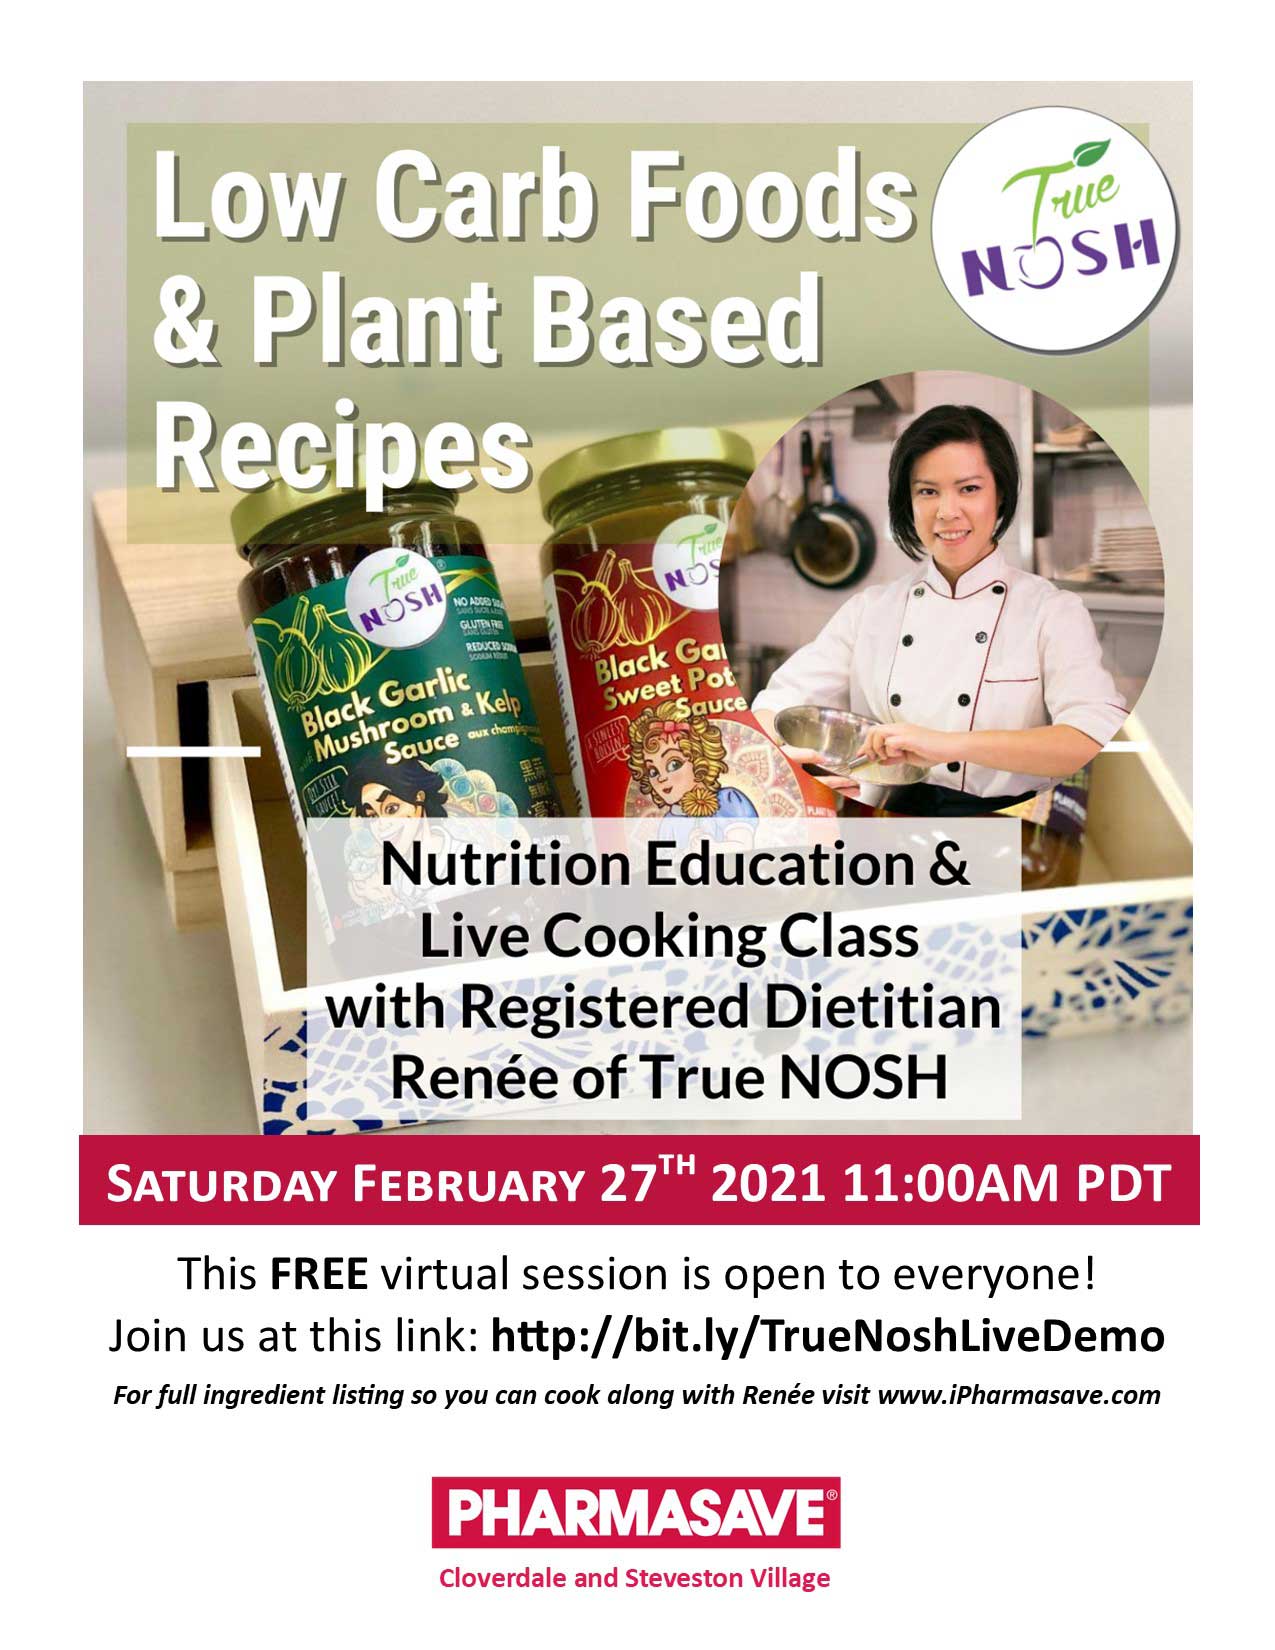 Low Carb Foods & Plant Based Recipes – Nutrition Education & Live Cooking Class with Registered Dietitian Renée of True NOSH Saturday February 27th 2021, 6:00pm PDT This FREE virtual session is open to everyone! Join us at this link: http://bit.ly/TrueNoshLiveDemo For full ingredient listing so you can cook along with Renée visit www.iPharmasave.com